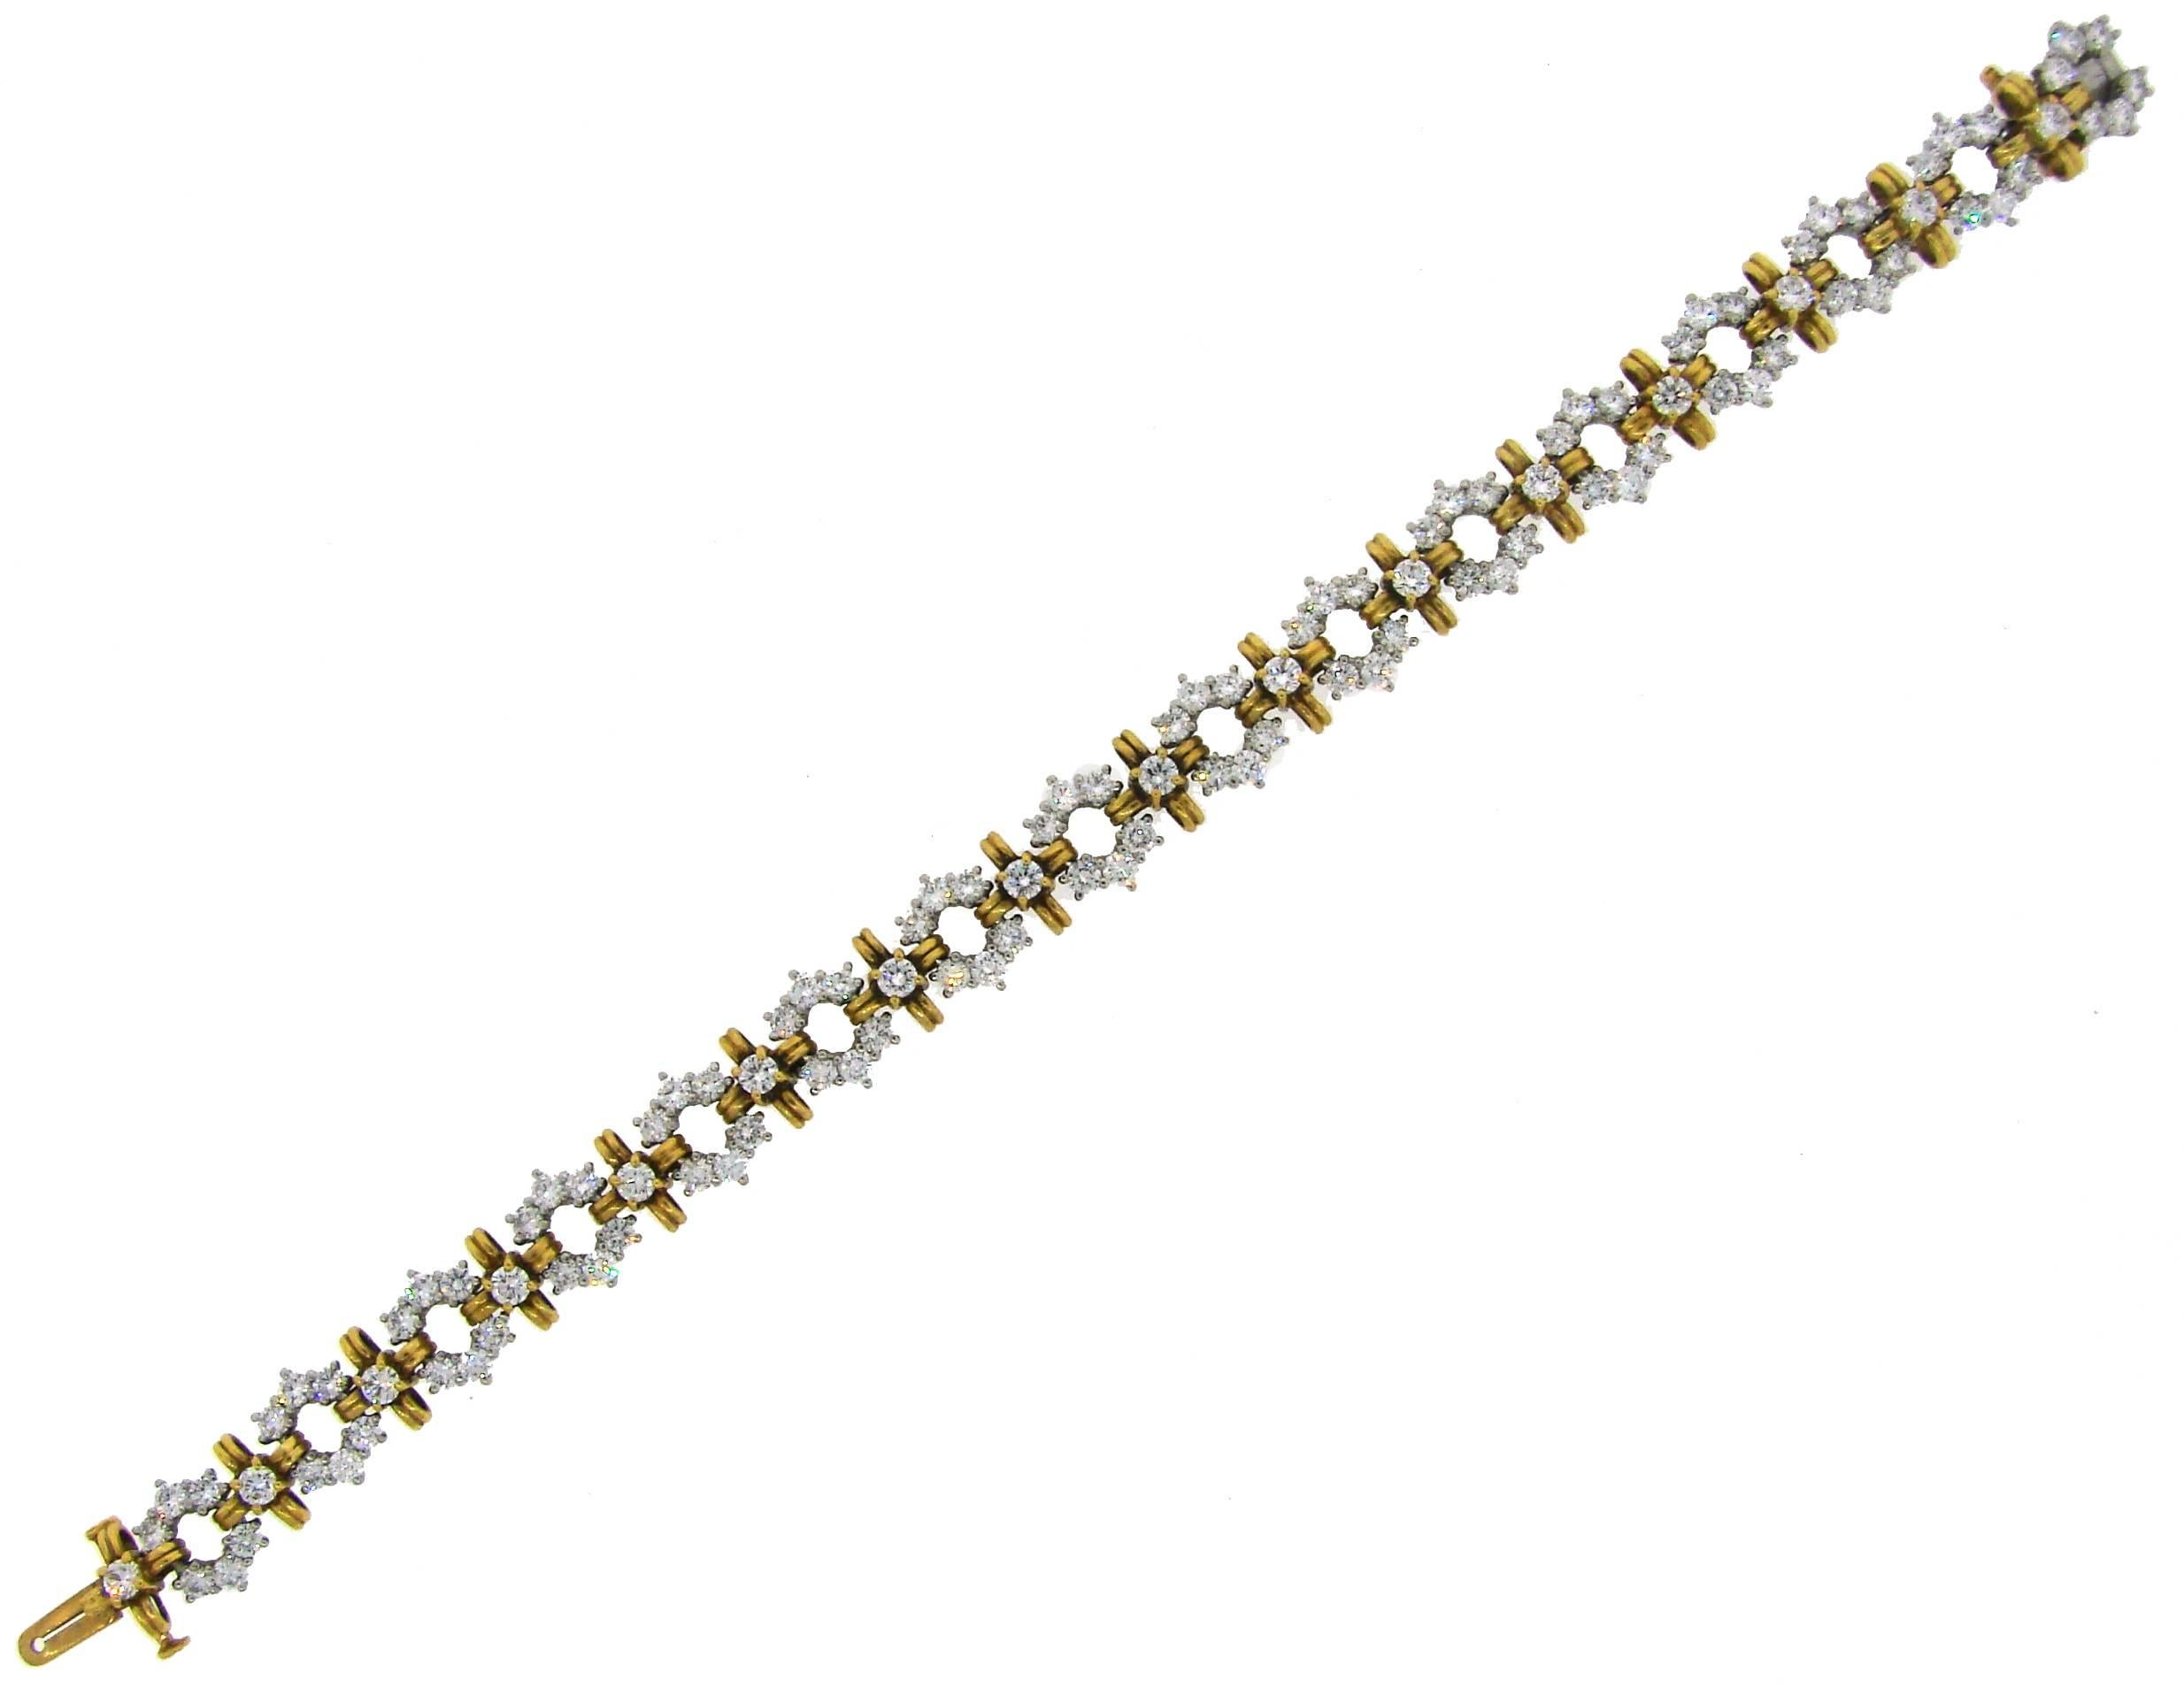 Elegant and timeless bracelet created by Tiffany & Co. in 1989. It belongs to 